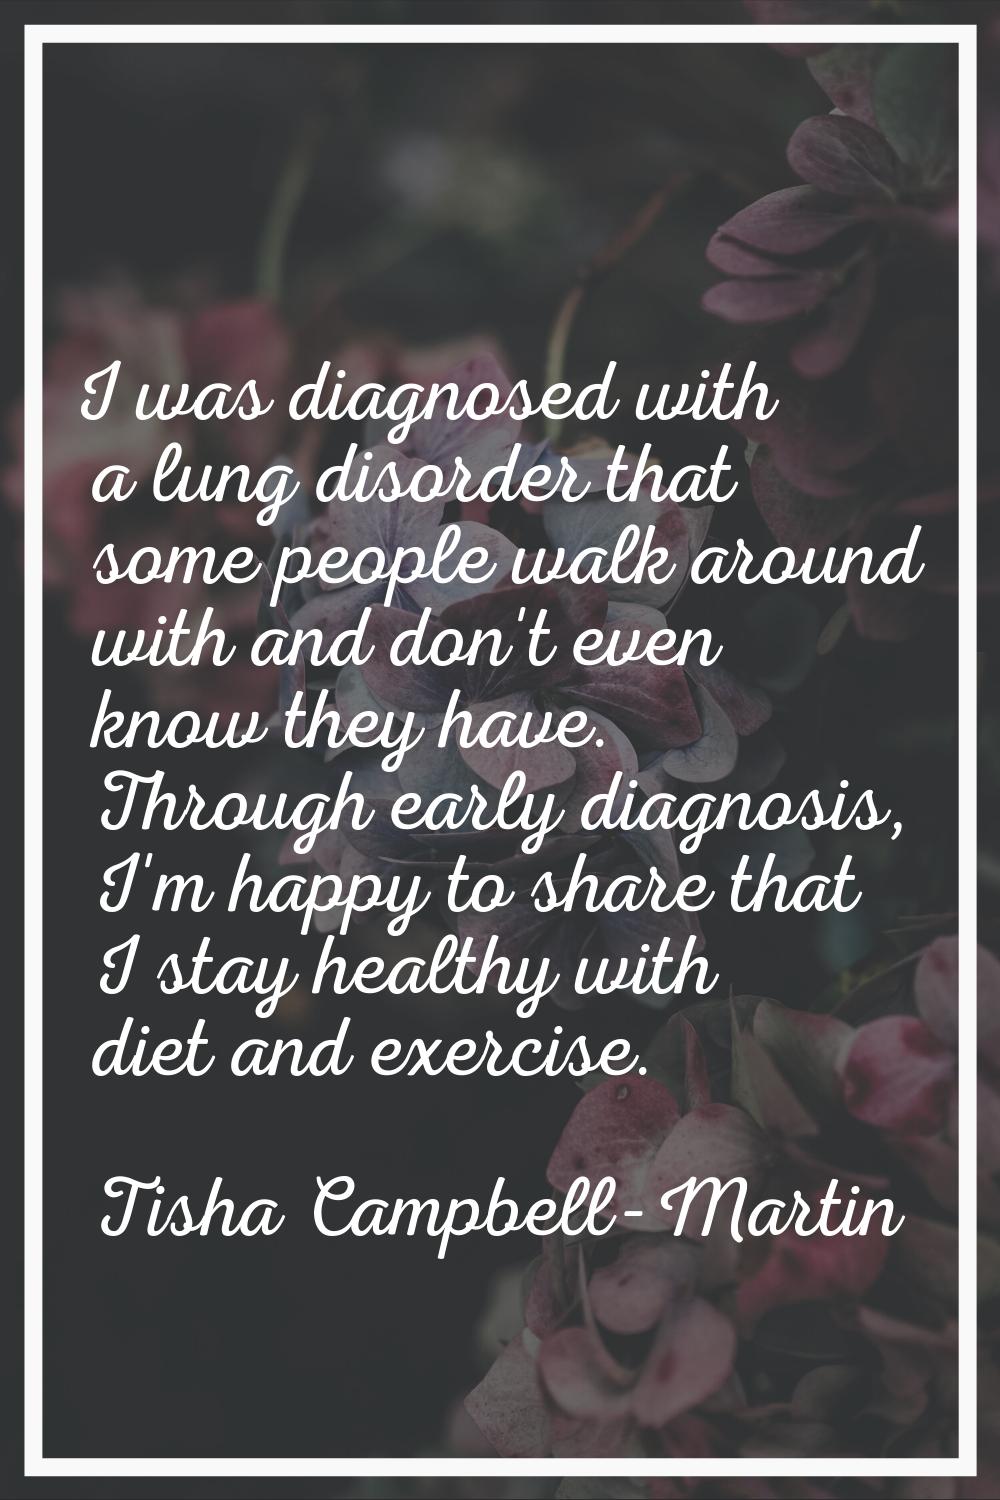 I was diagnosed with a lung disorder that some people walk around with and don't even know they hav